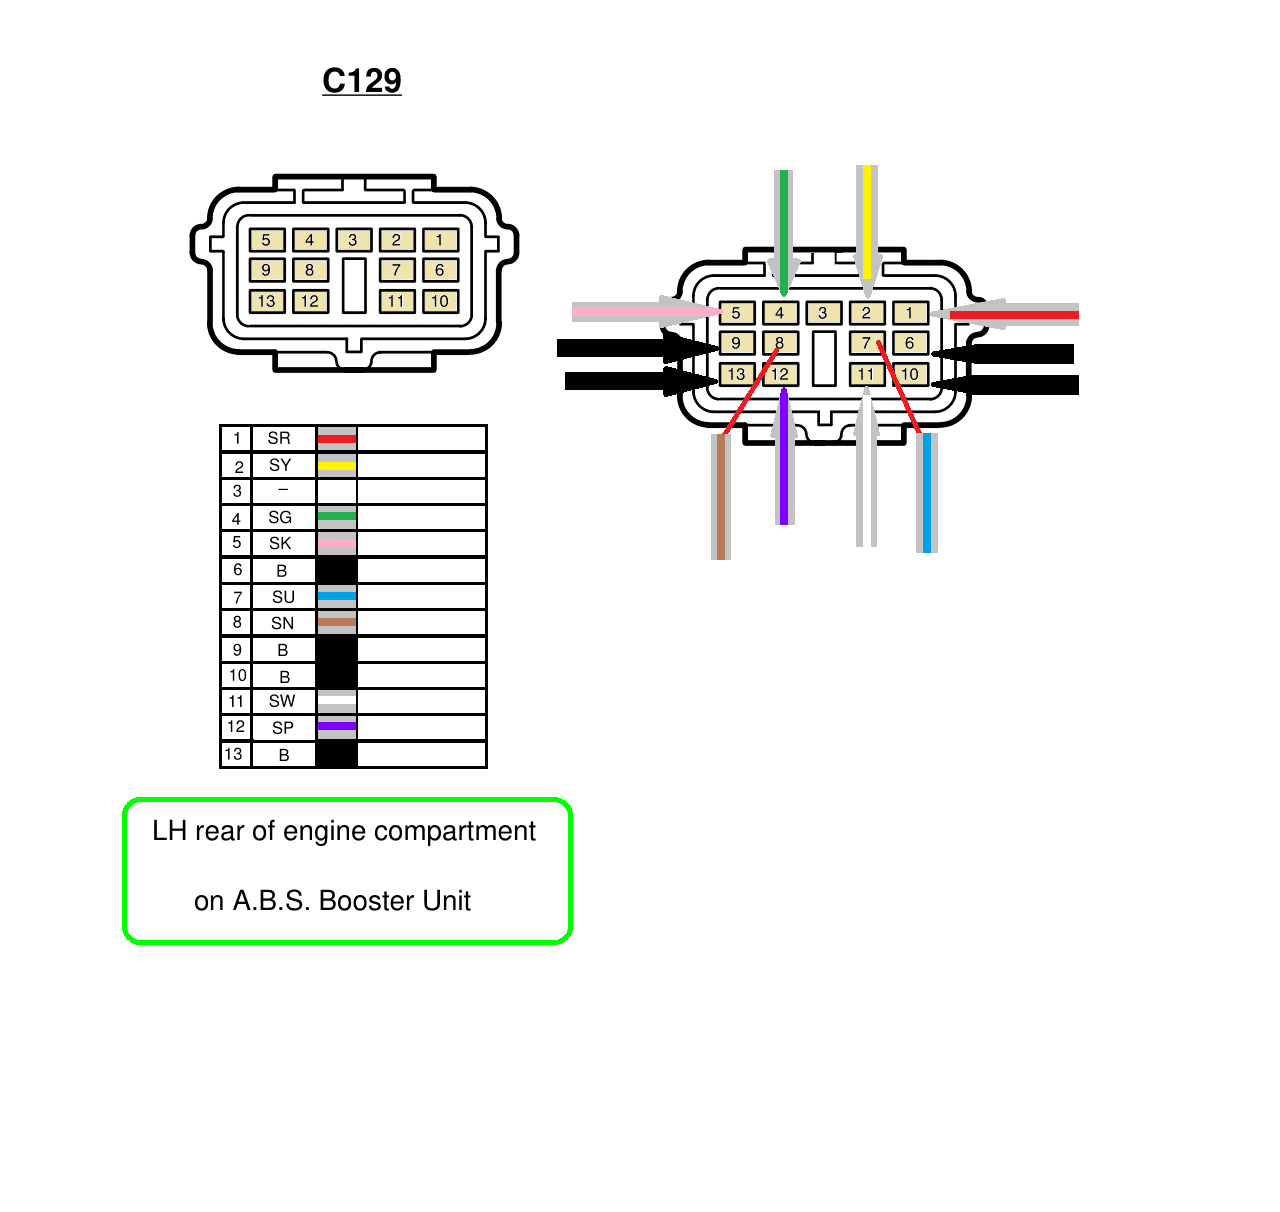 Discovery 1 MY97 - Electrical 444.png